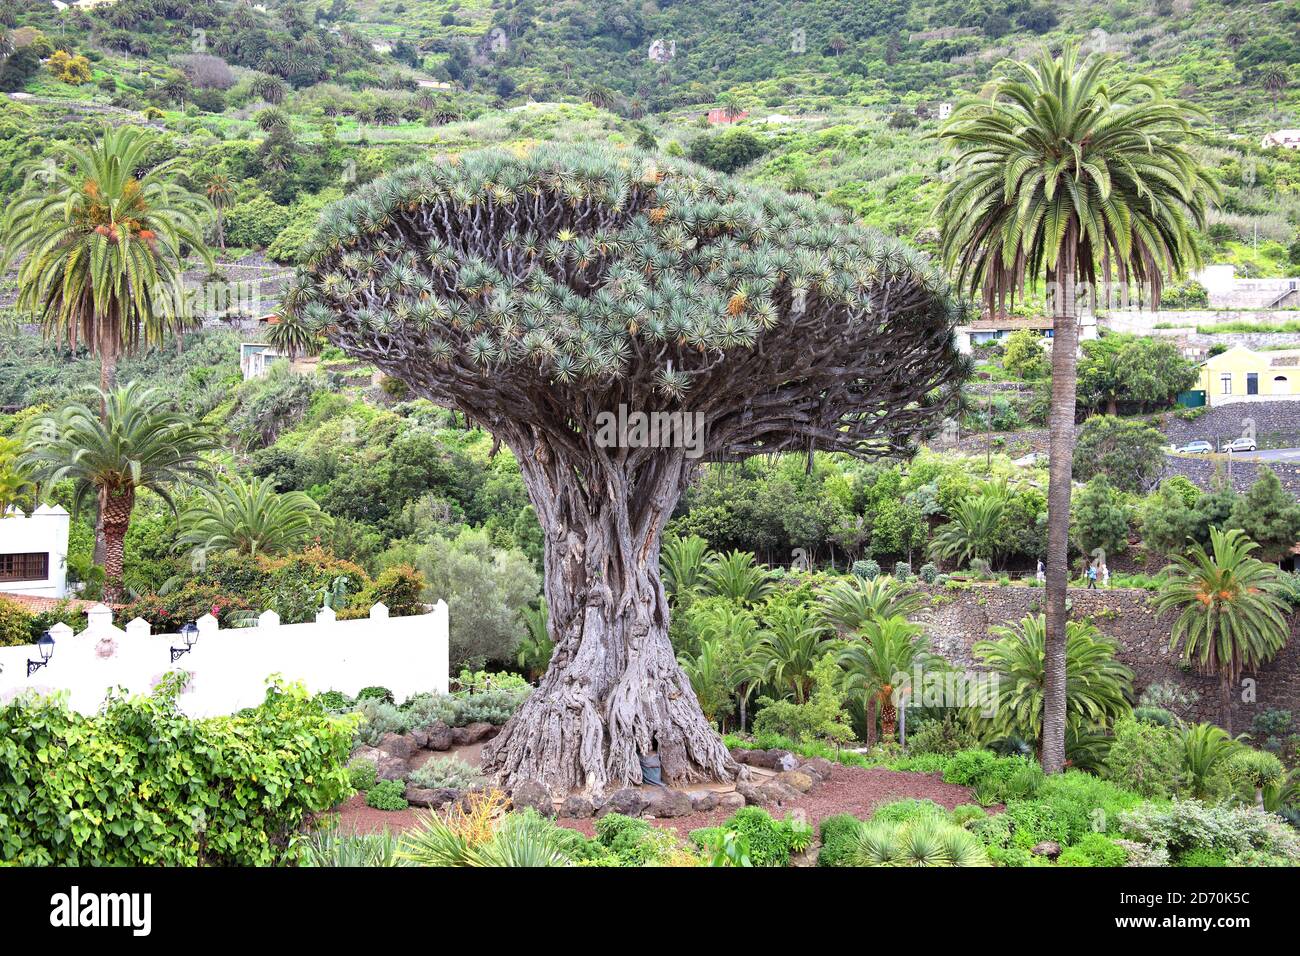 Drago Milenario (dracaena draco), Icod de los Vinos, Tenerife, Canary Islands, Spain is a tree like plant with red sap and is said to be 1000 years ol Stock Photo